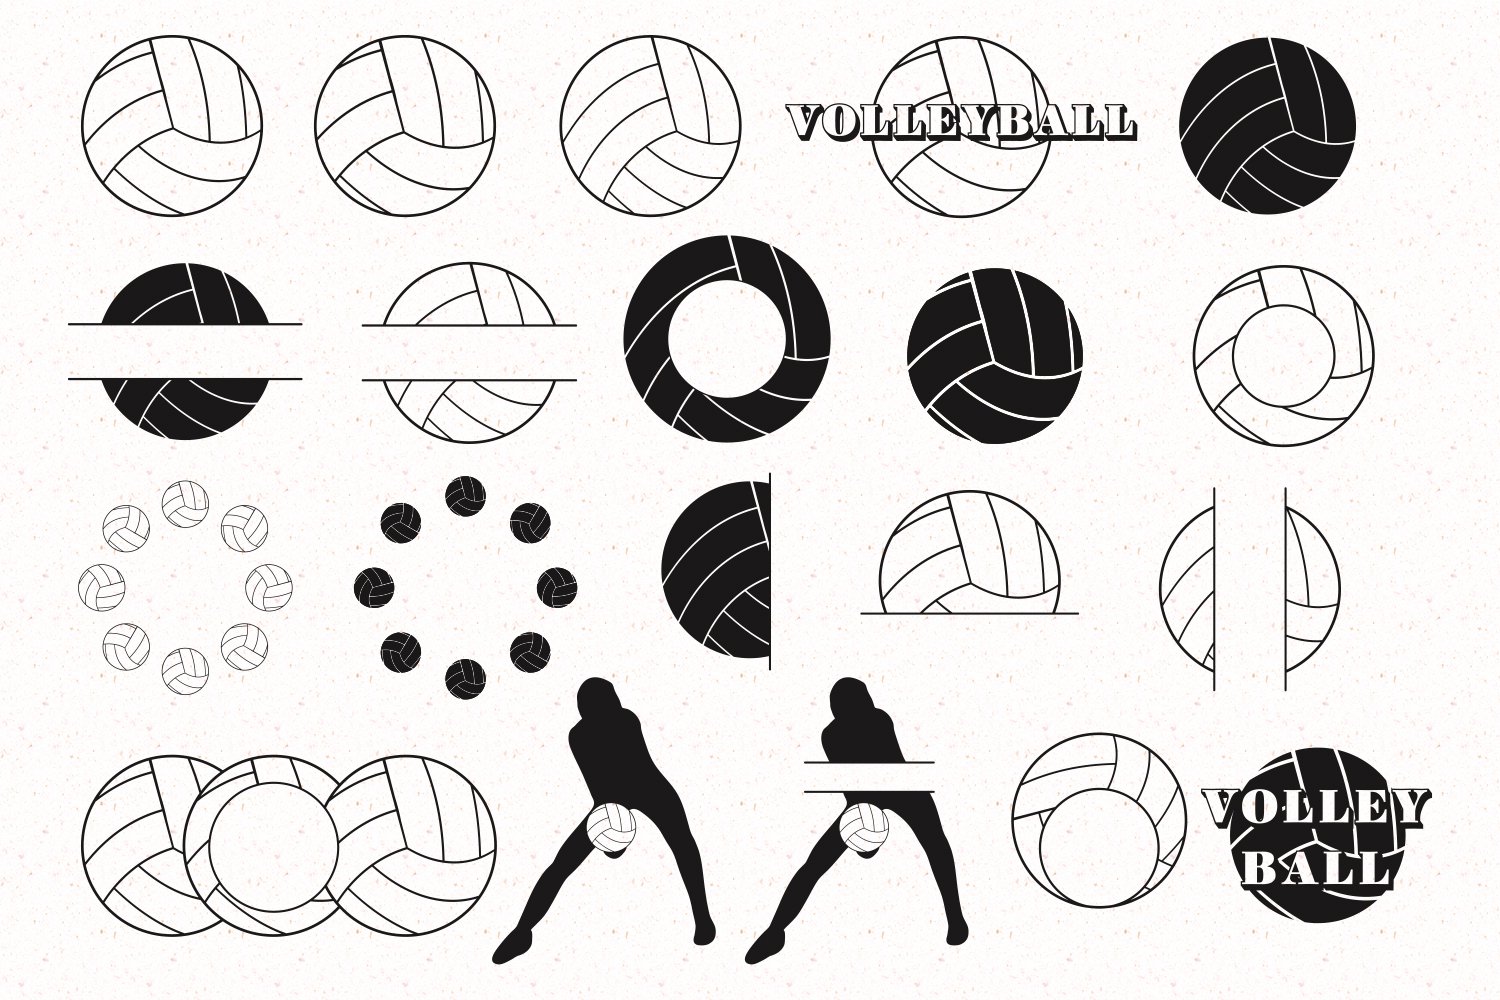 Diverse of volleyball graphic elements.